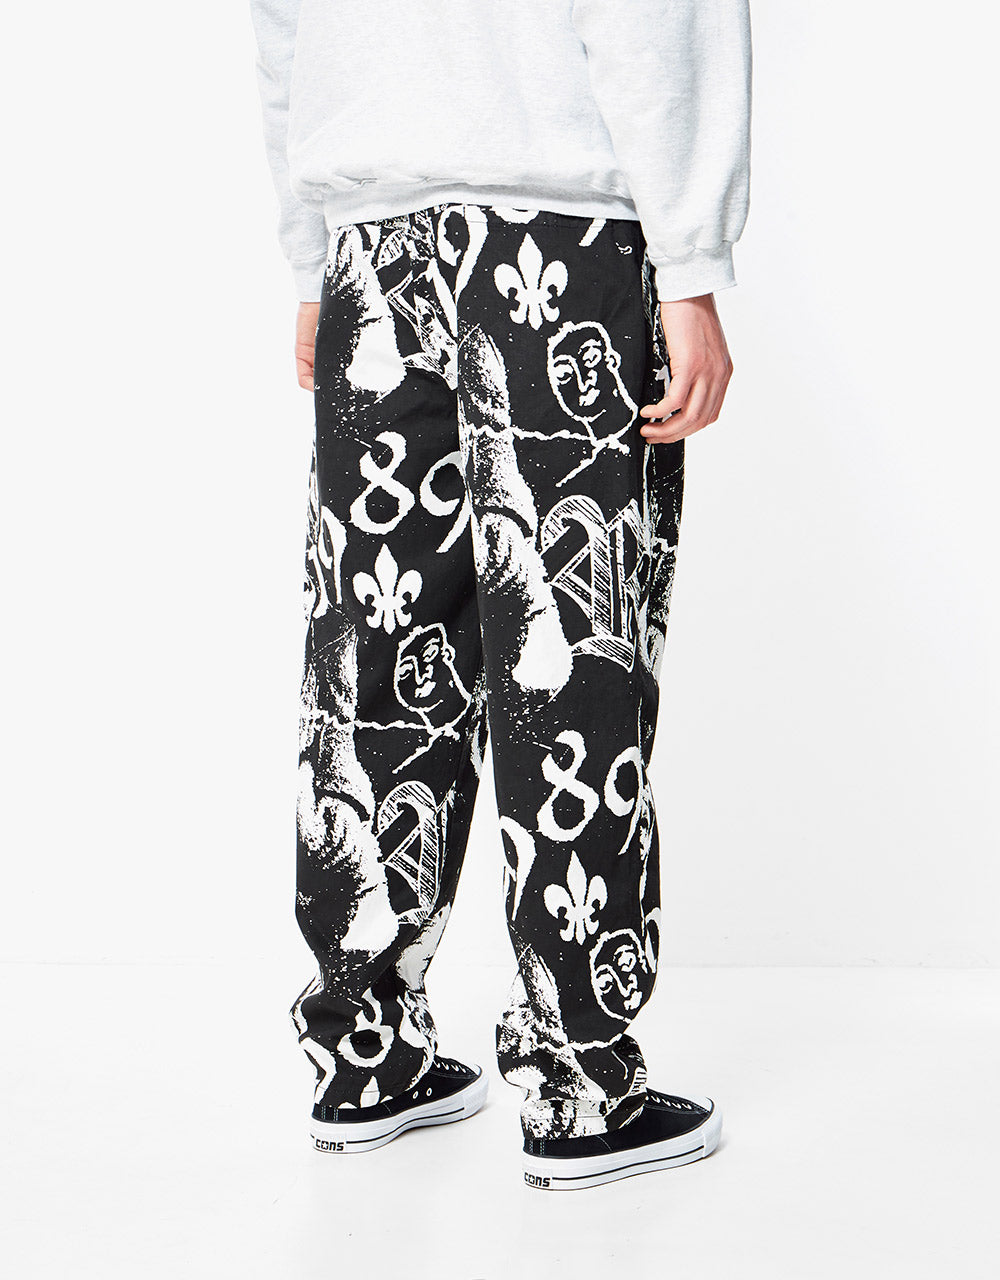 Route One Organic Baggy Pants - Medievil Black/White